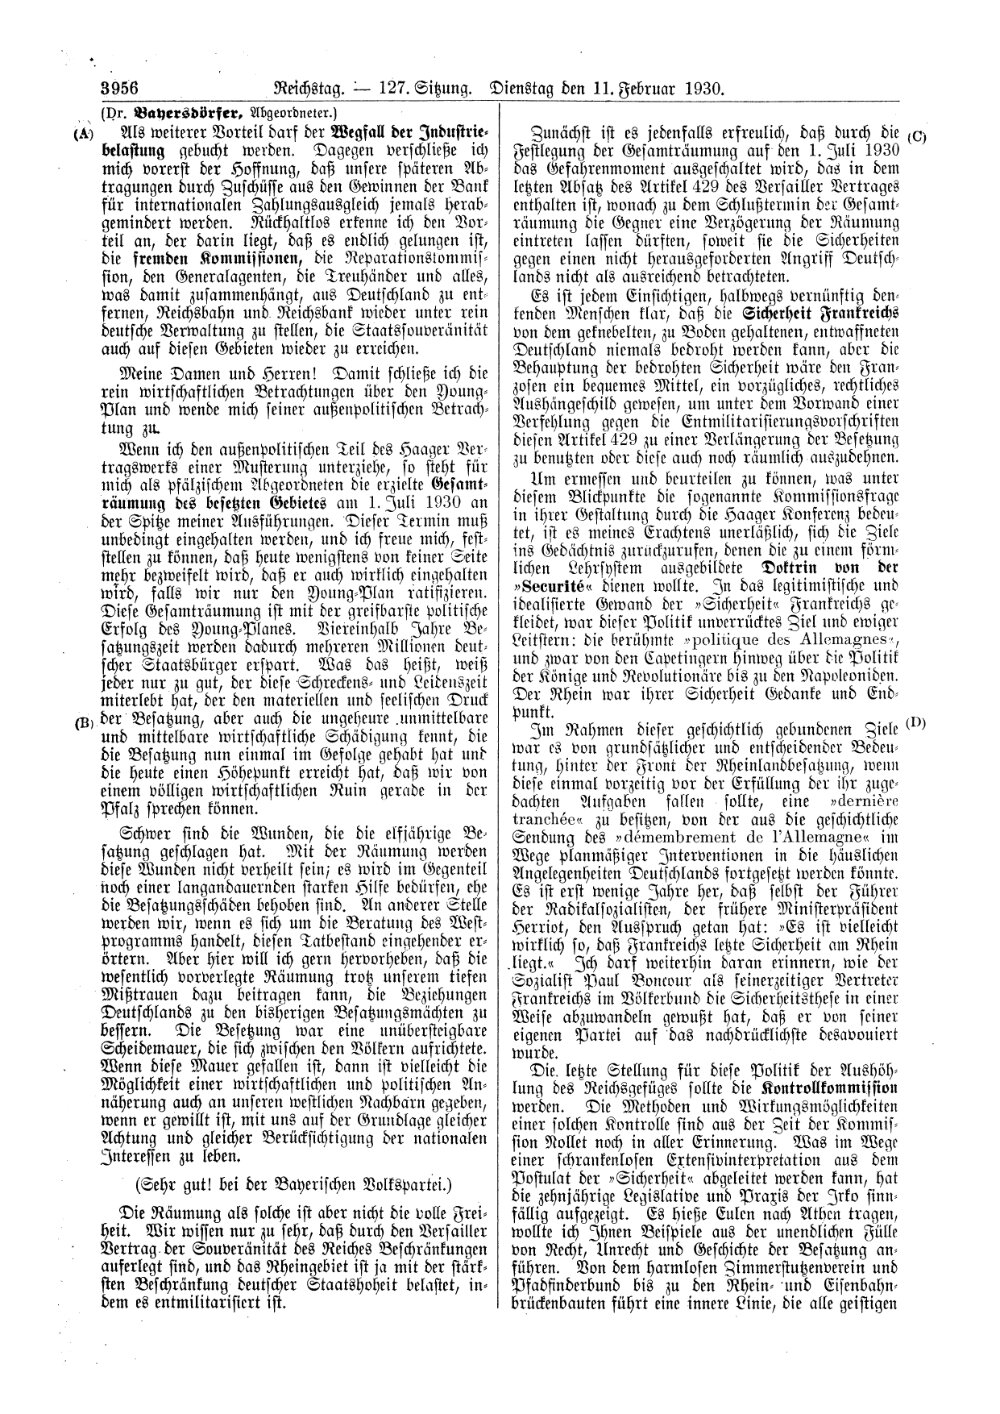 Scan of page 3956